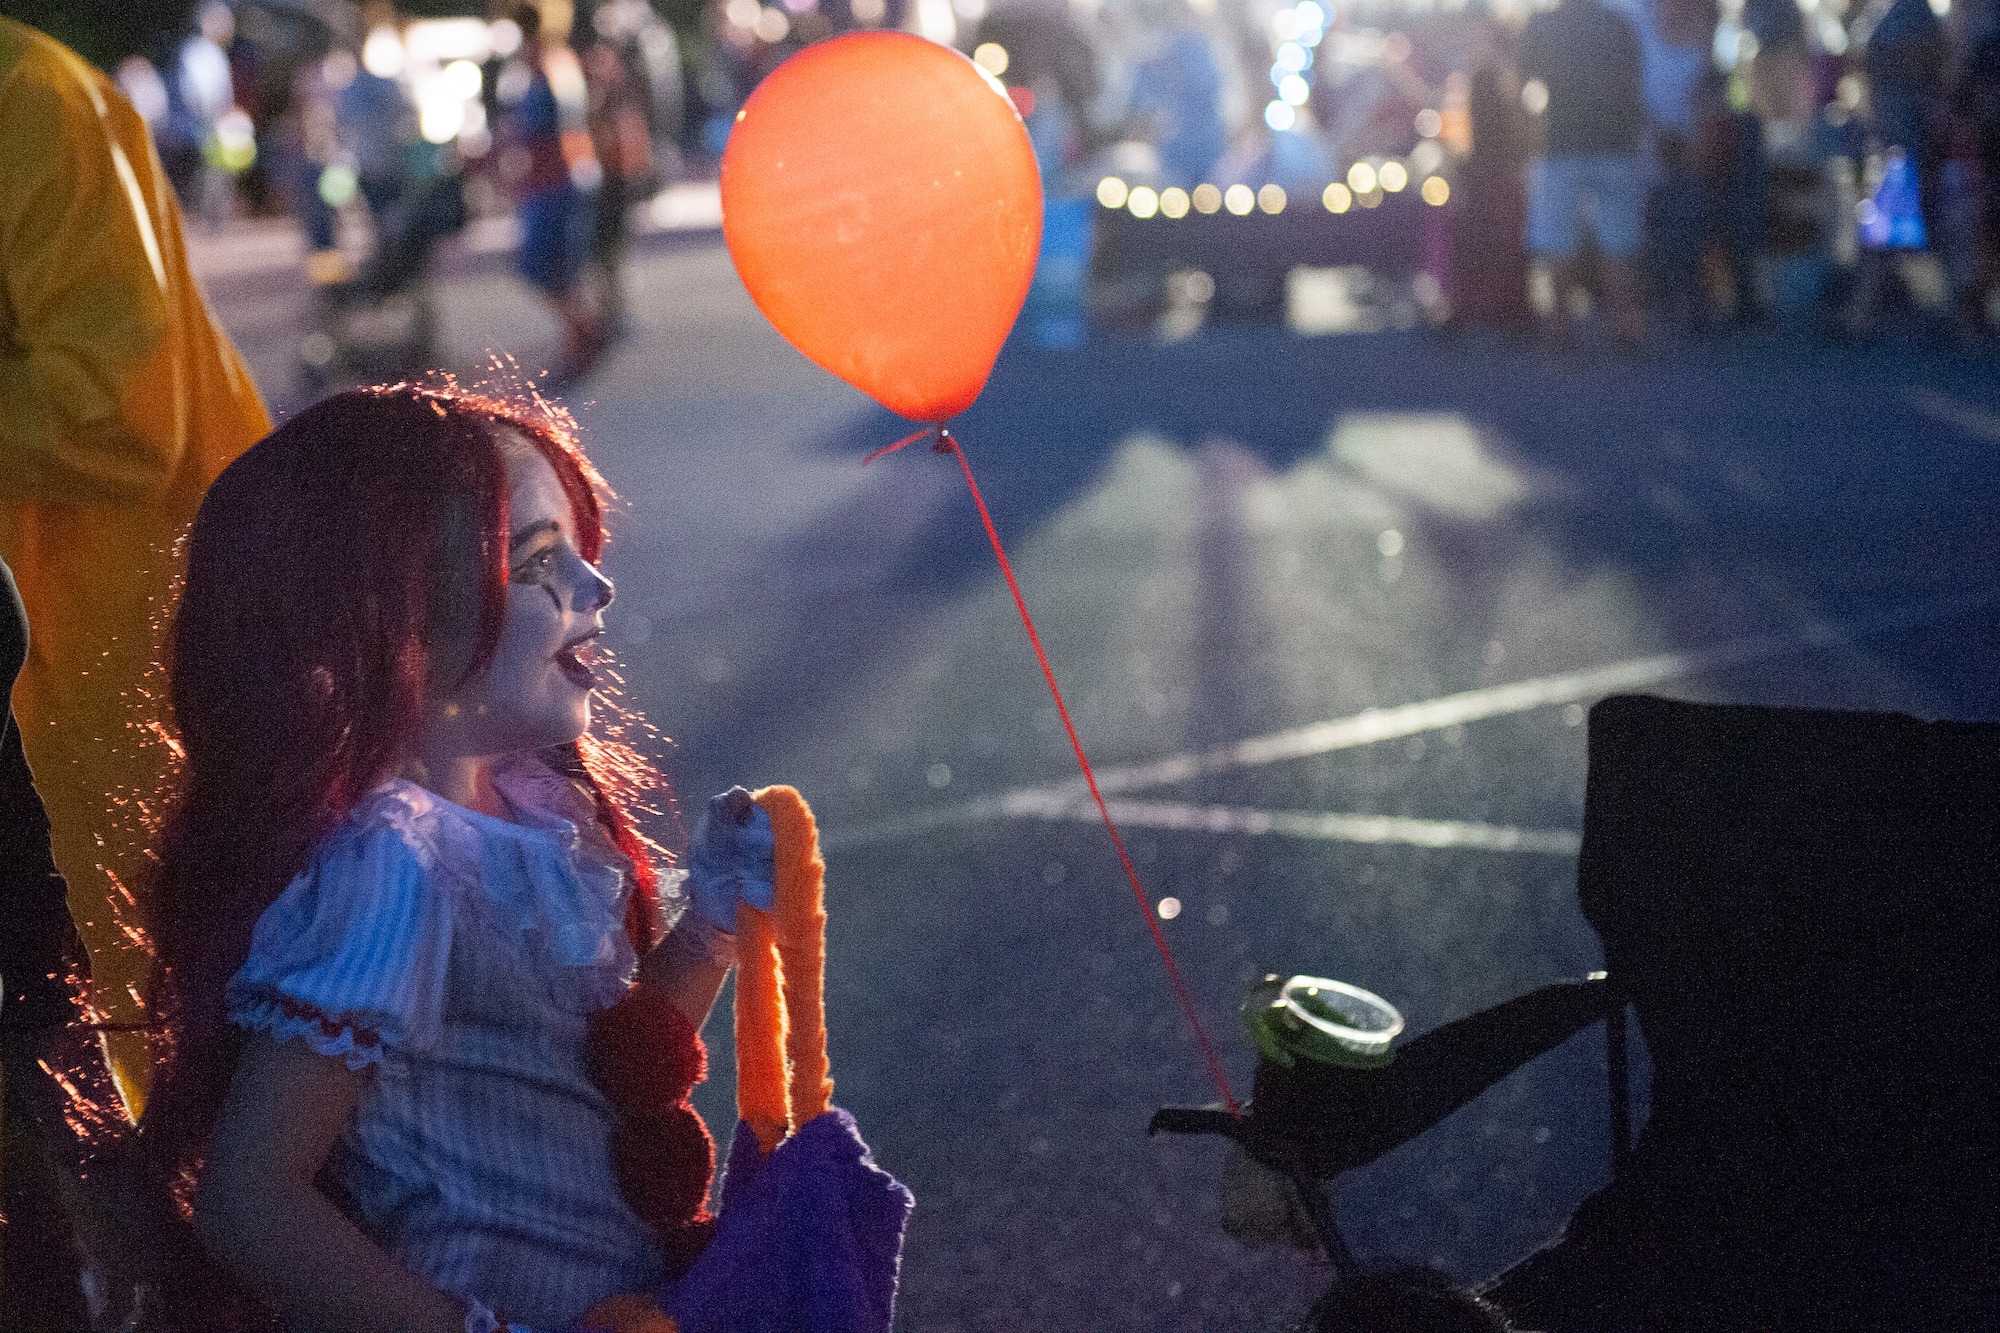 A participant smiles during Trunk or Treat Oct. 25, 2019, at Moody Air Force Base, Ga. Participants, dressed in costumes, received candy from volunteers, who decorated their trunks. (U.S. Air Force photo by Airman 1st Class Jasmine M. Barnes)